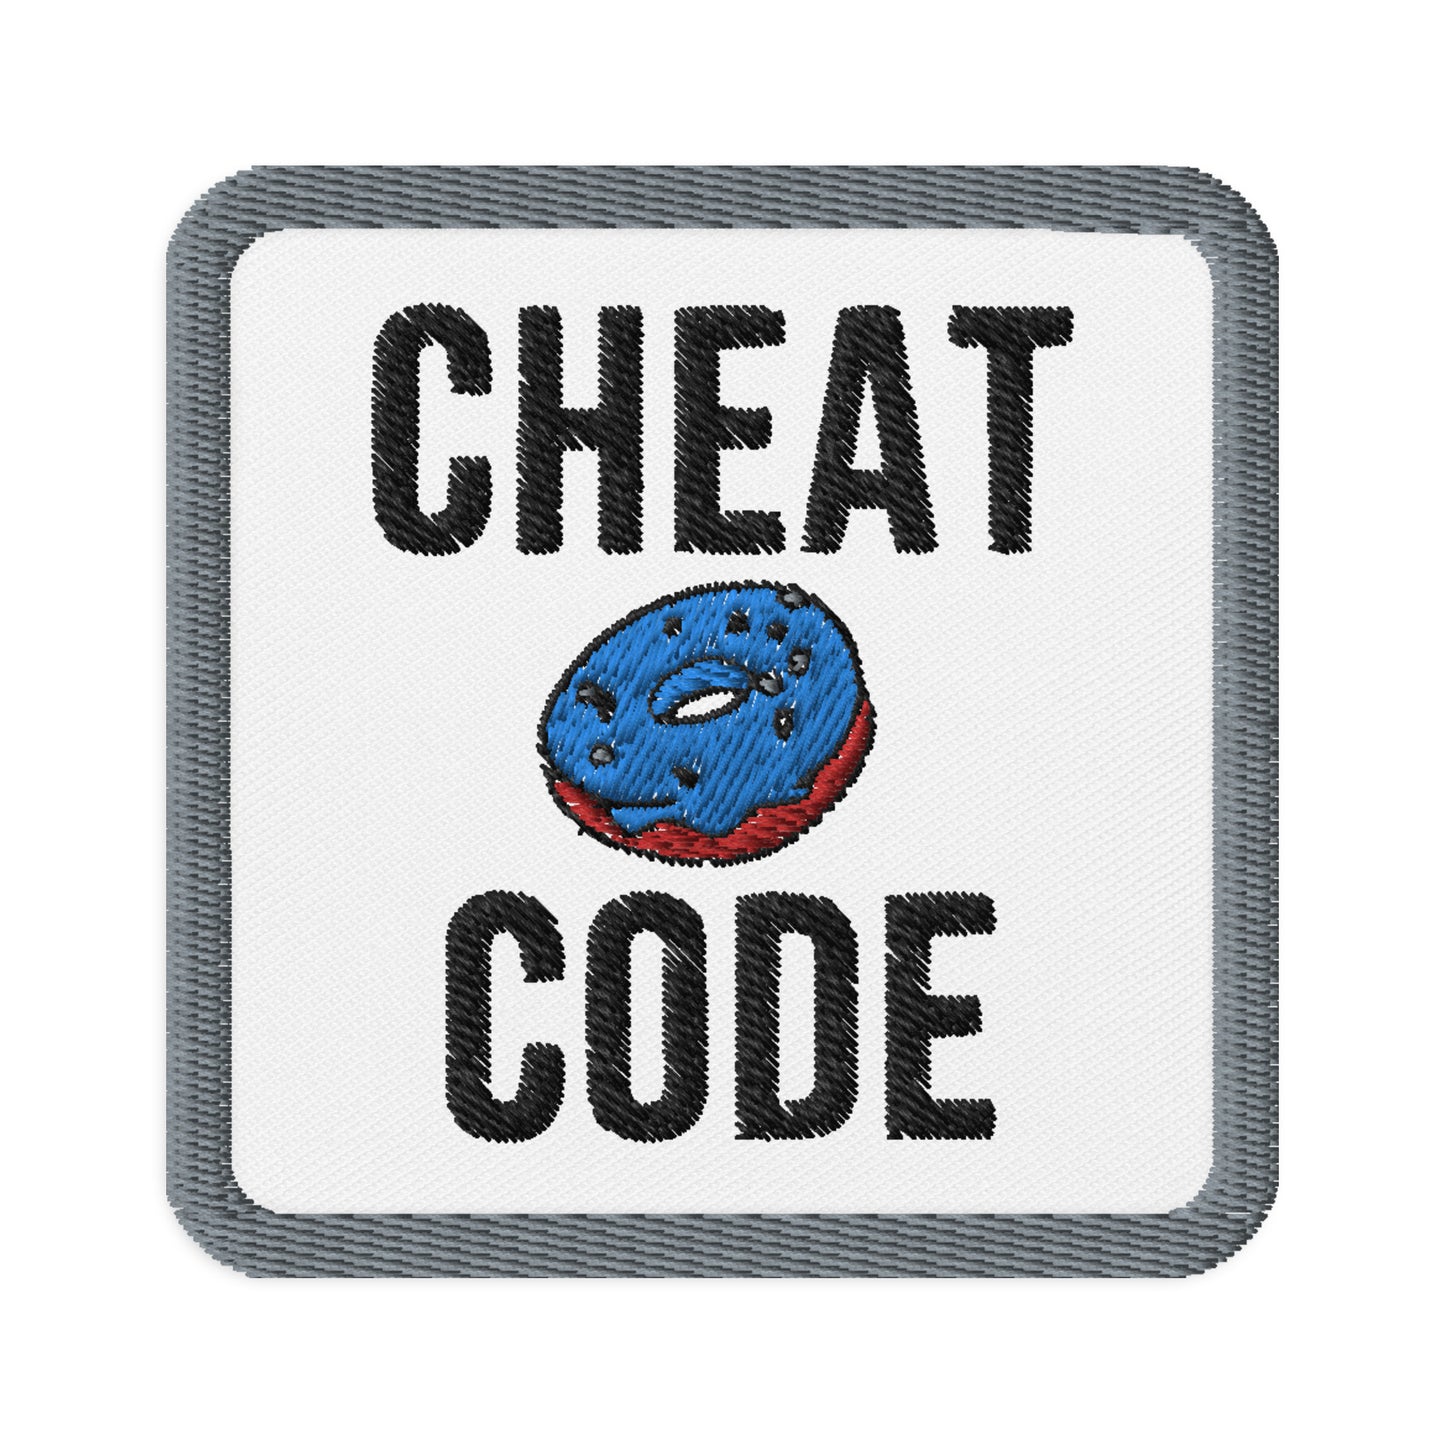 Cheat Code patch